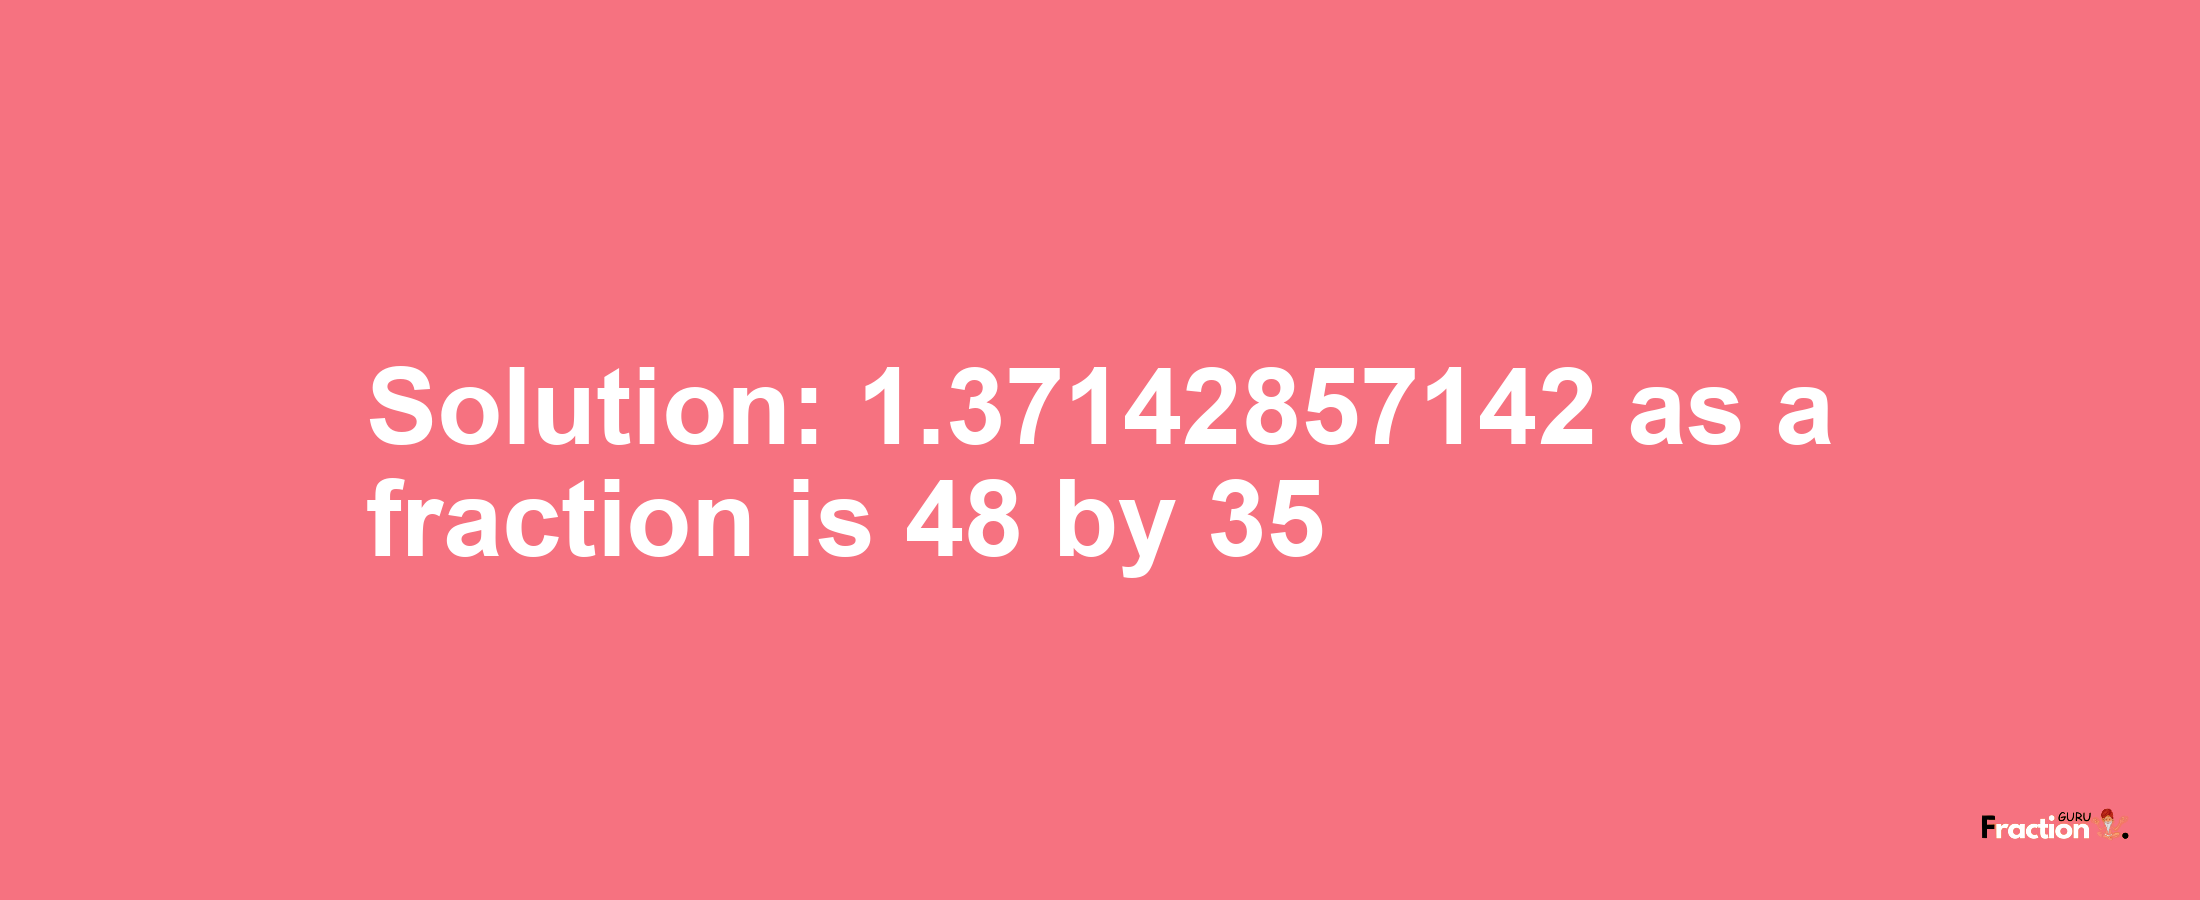 Solution:1.37142857142 as a fraction is 48/35